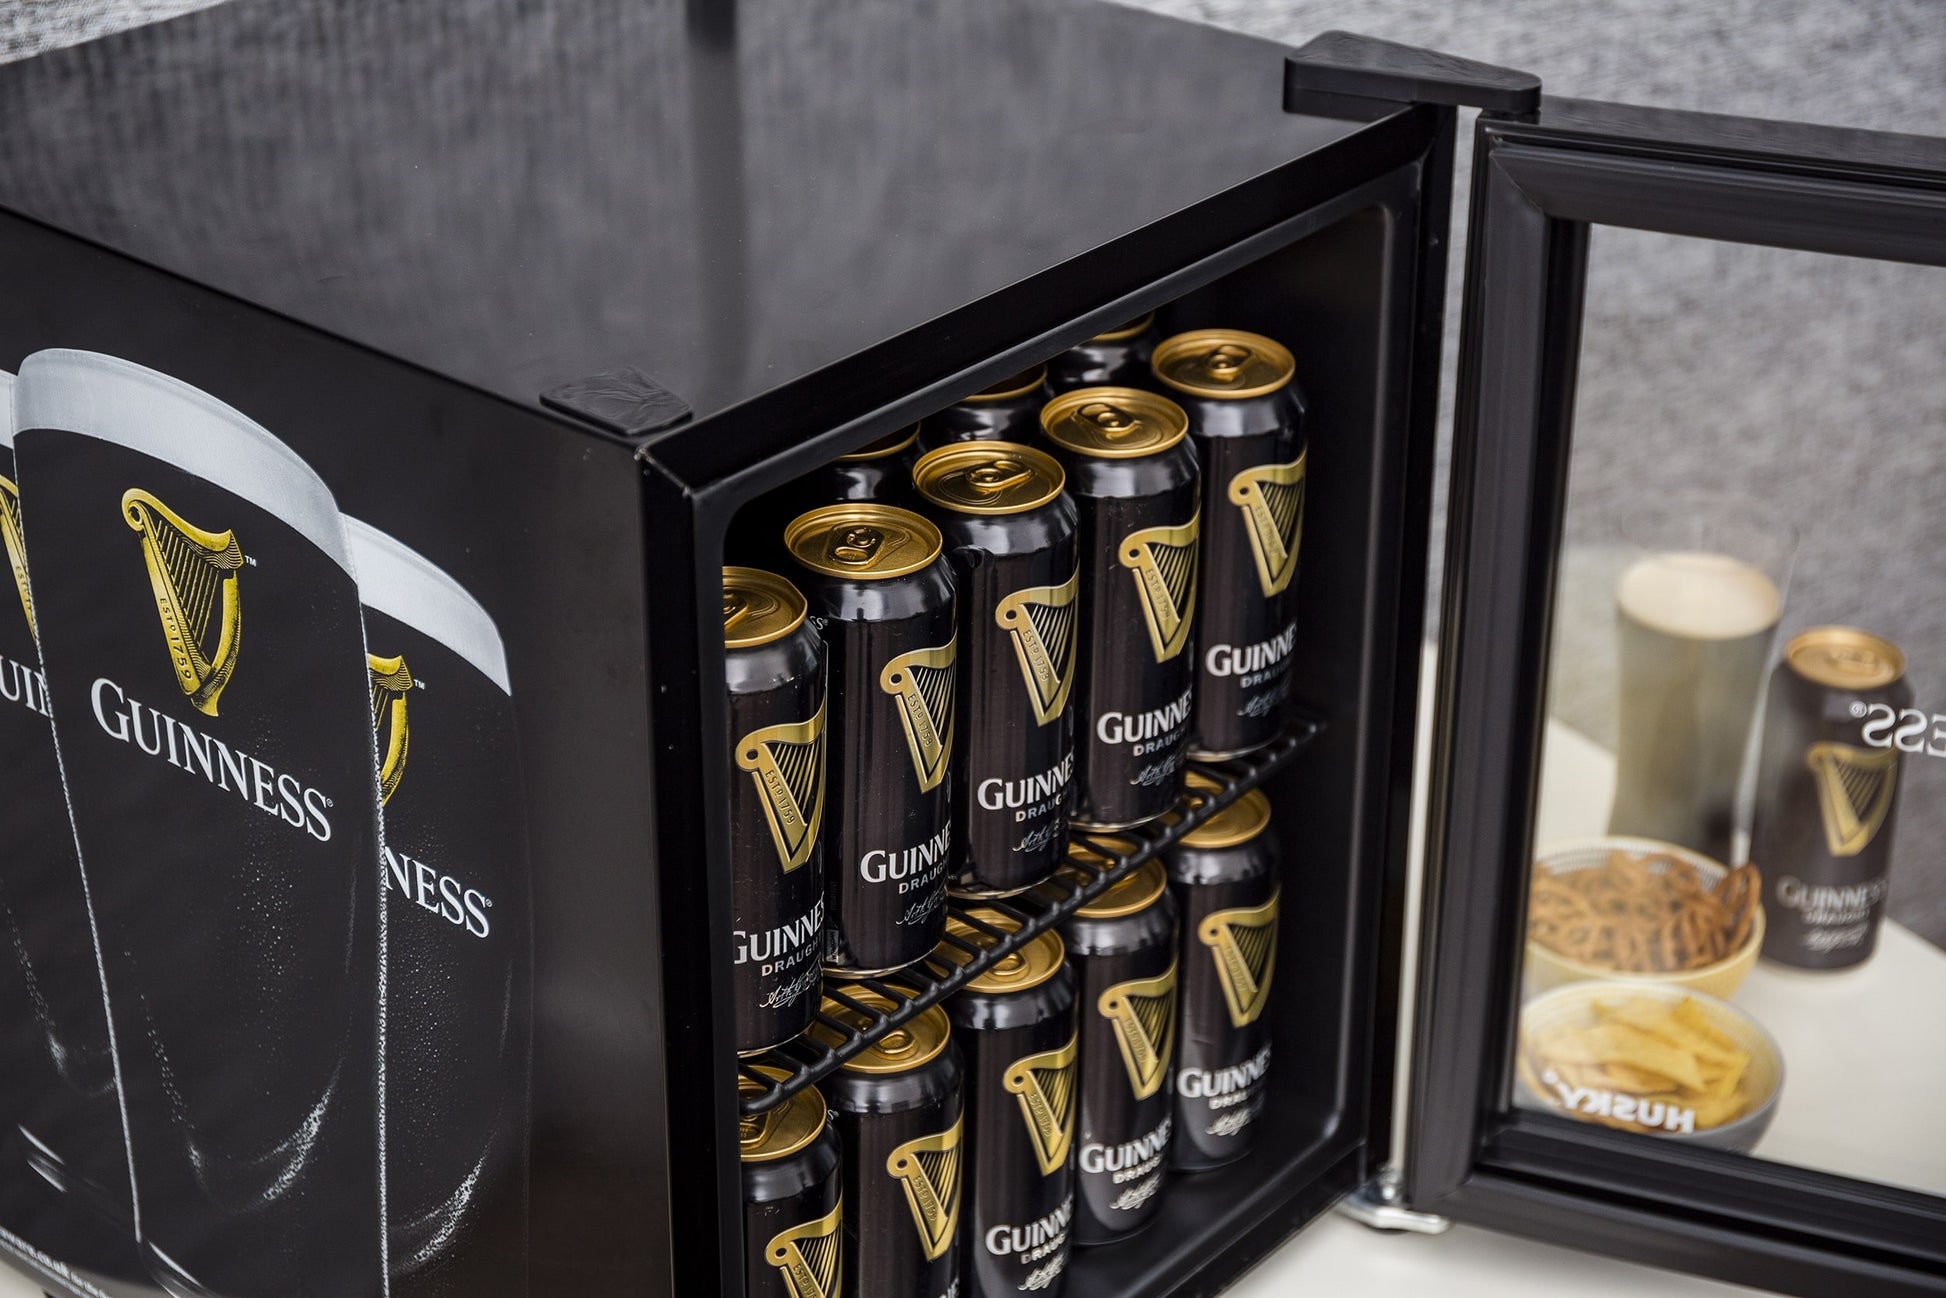 Guinness Fridge for your iconic stout brews chilled.